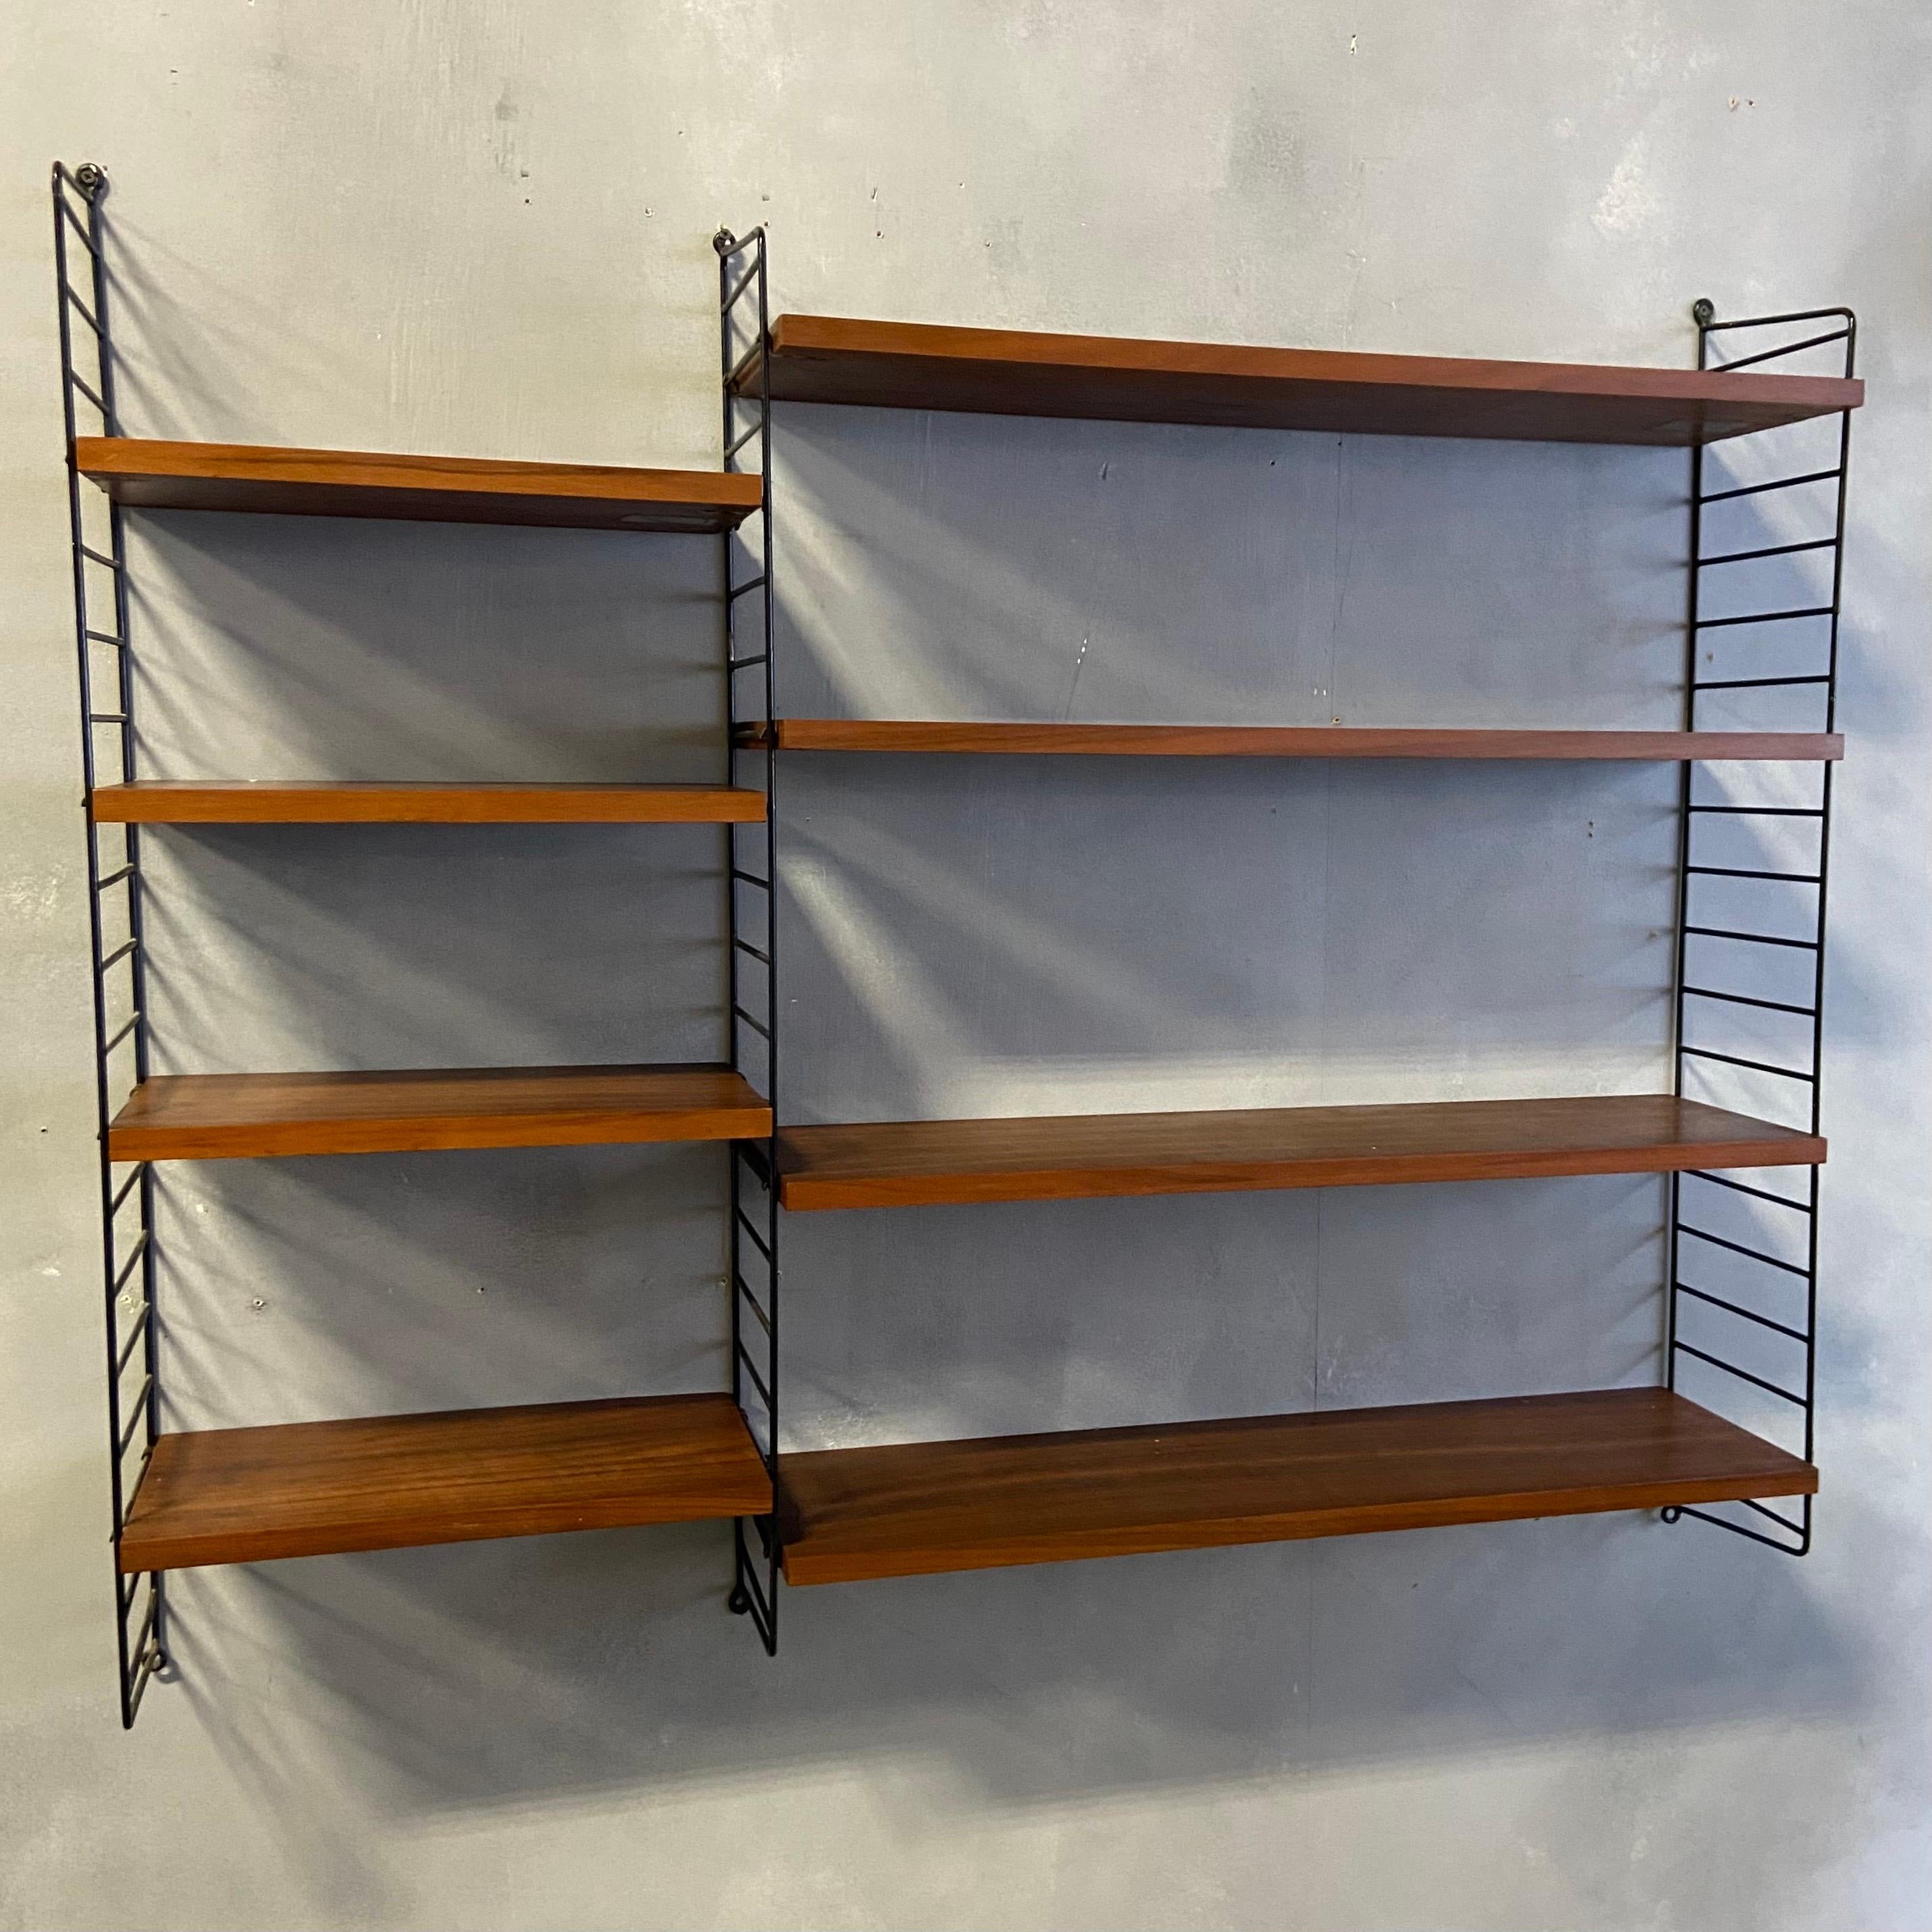 Beautiful Patina on this dark teak String Unit original from 1950. Featuring 8 shelves that are adjustable along the ladder work using the built in brass clips on each piece. This compact design would make an excellent small library, wall display,